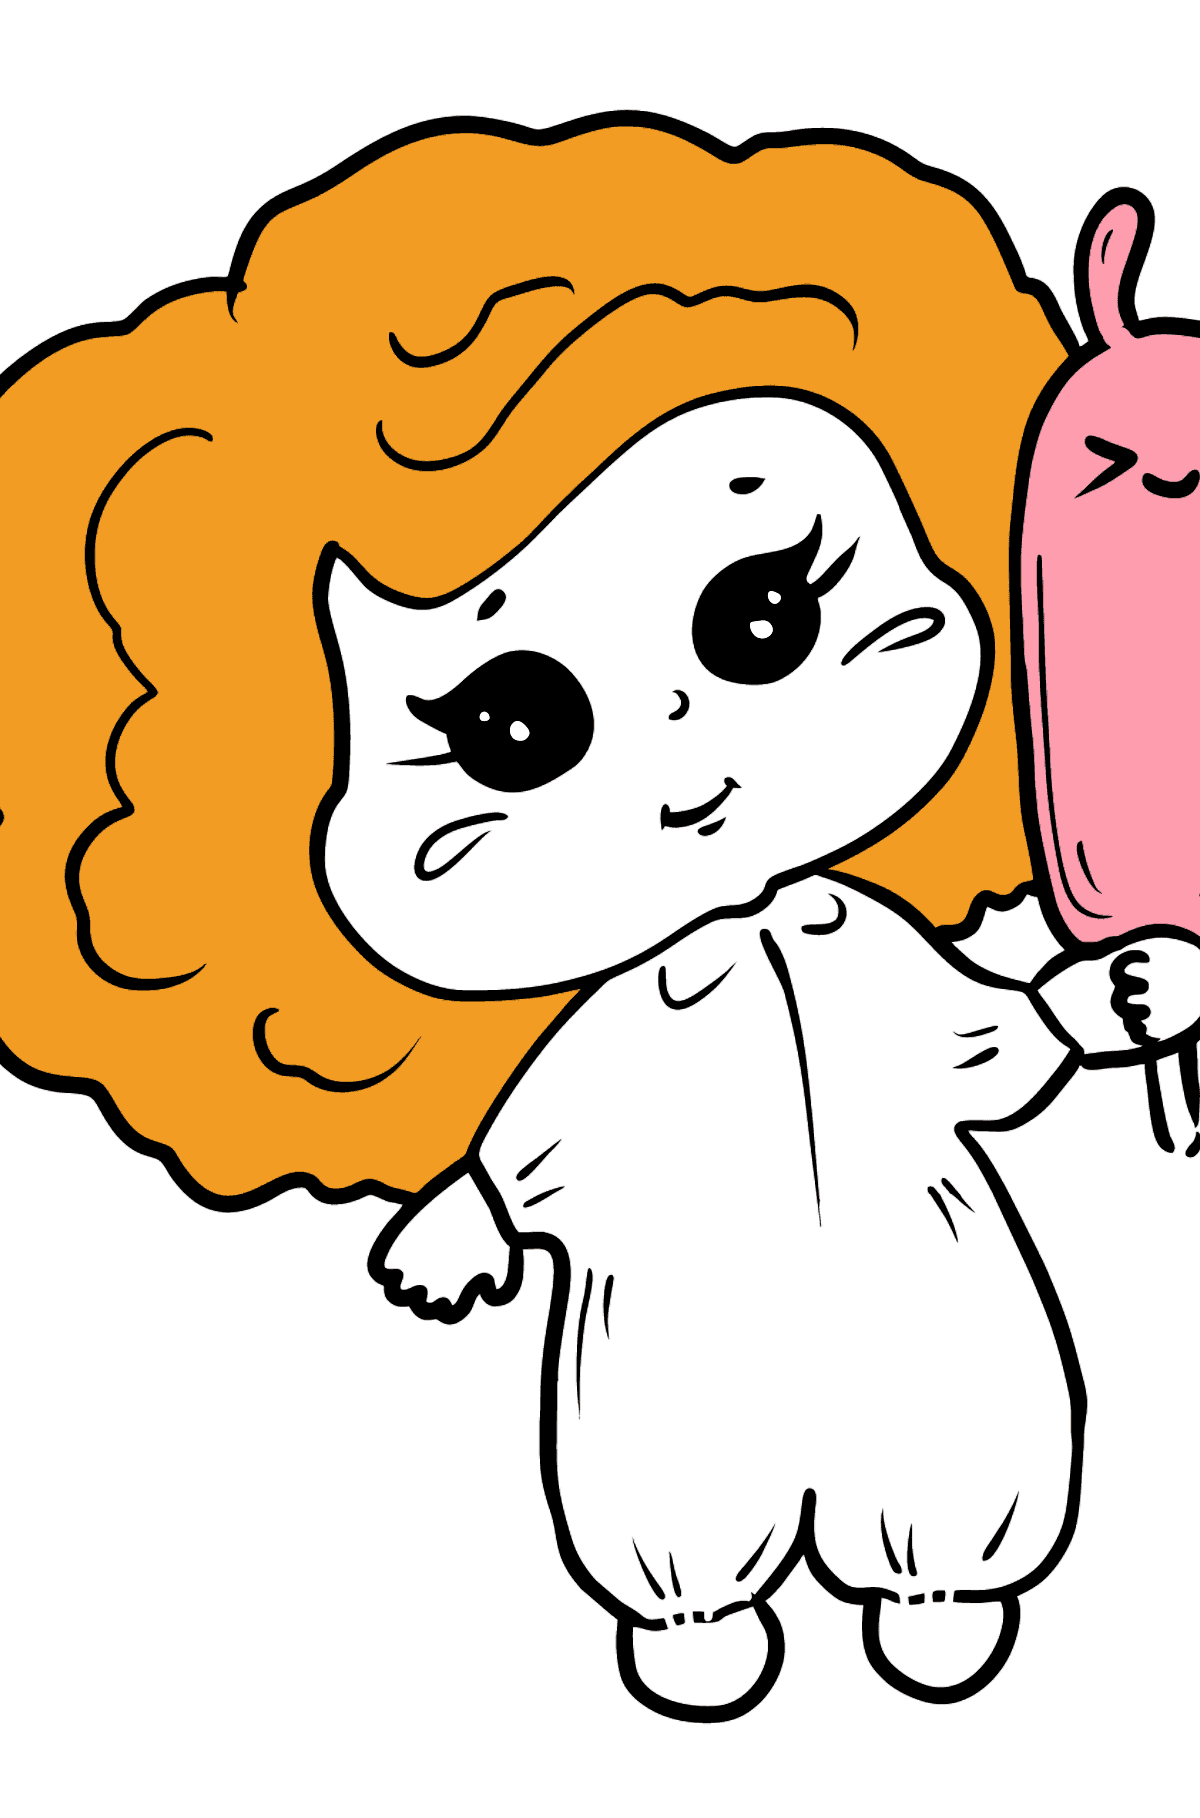 Girl and Ice Cream coloring page - Coloring Pages for Kids